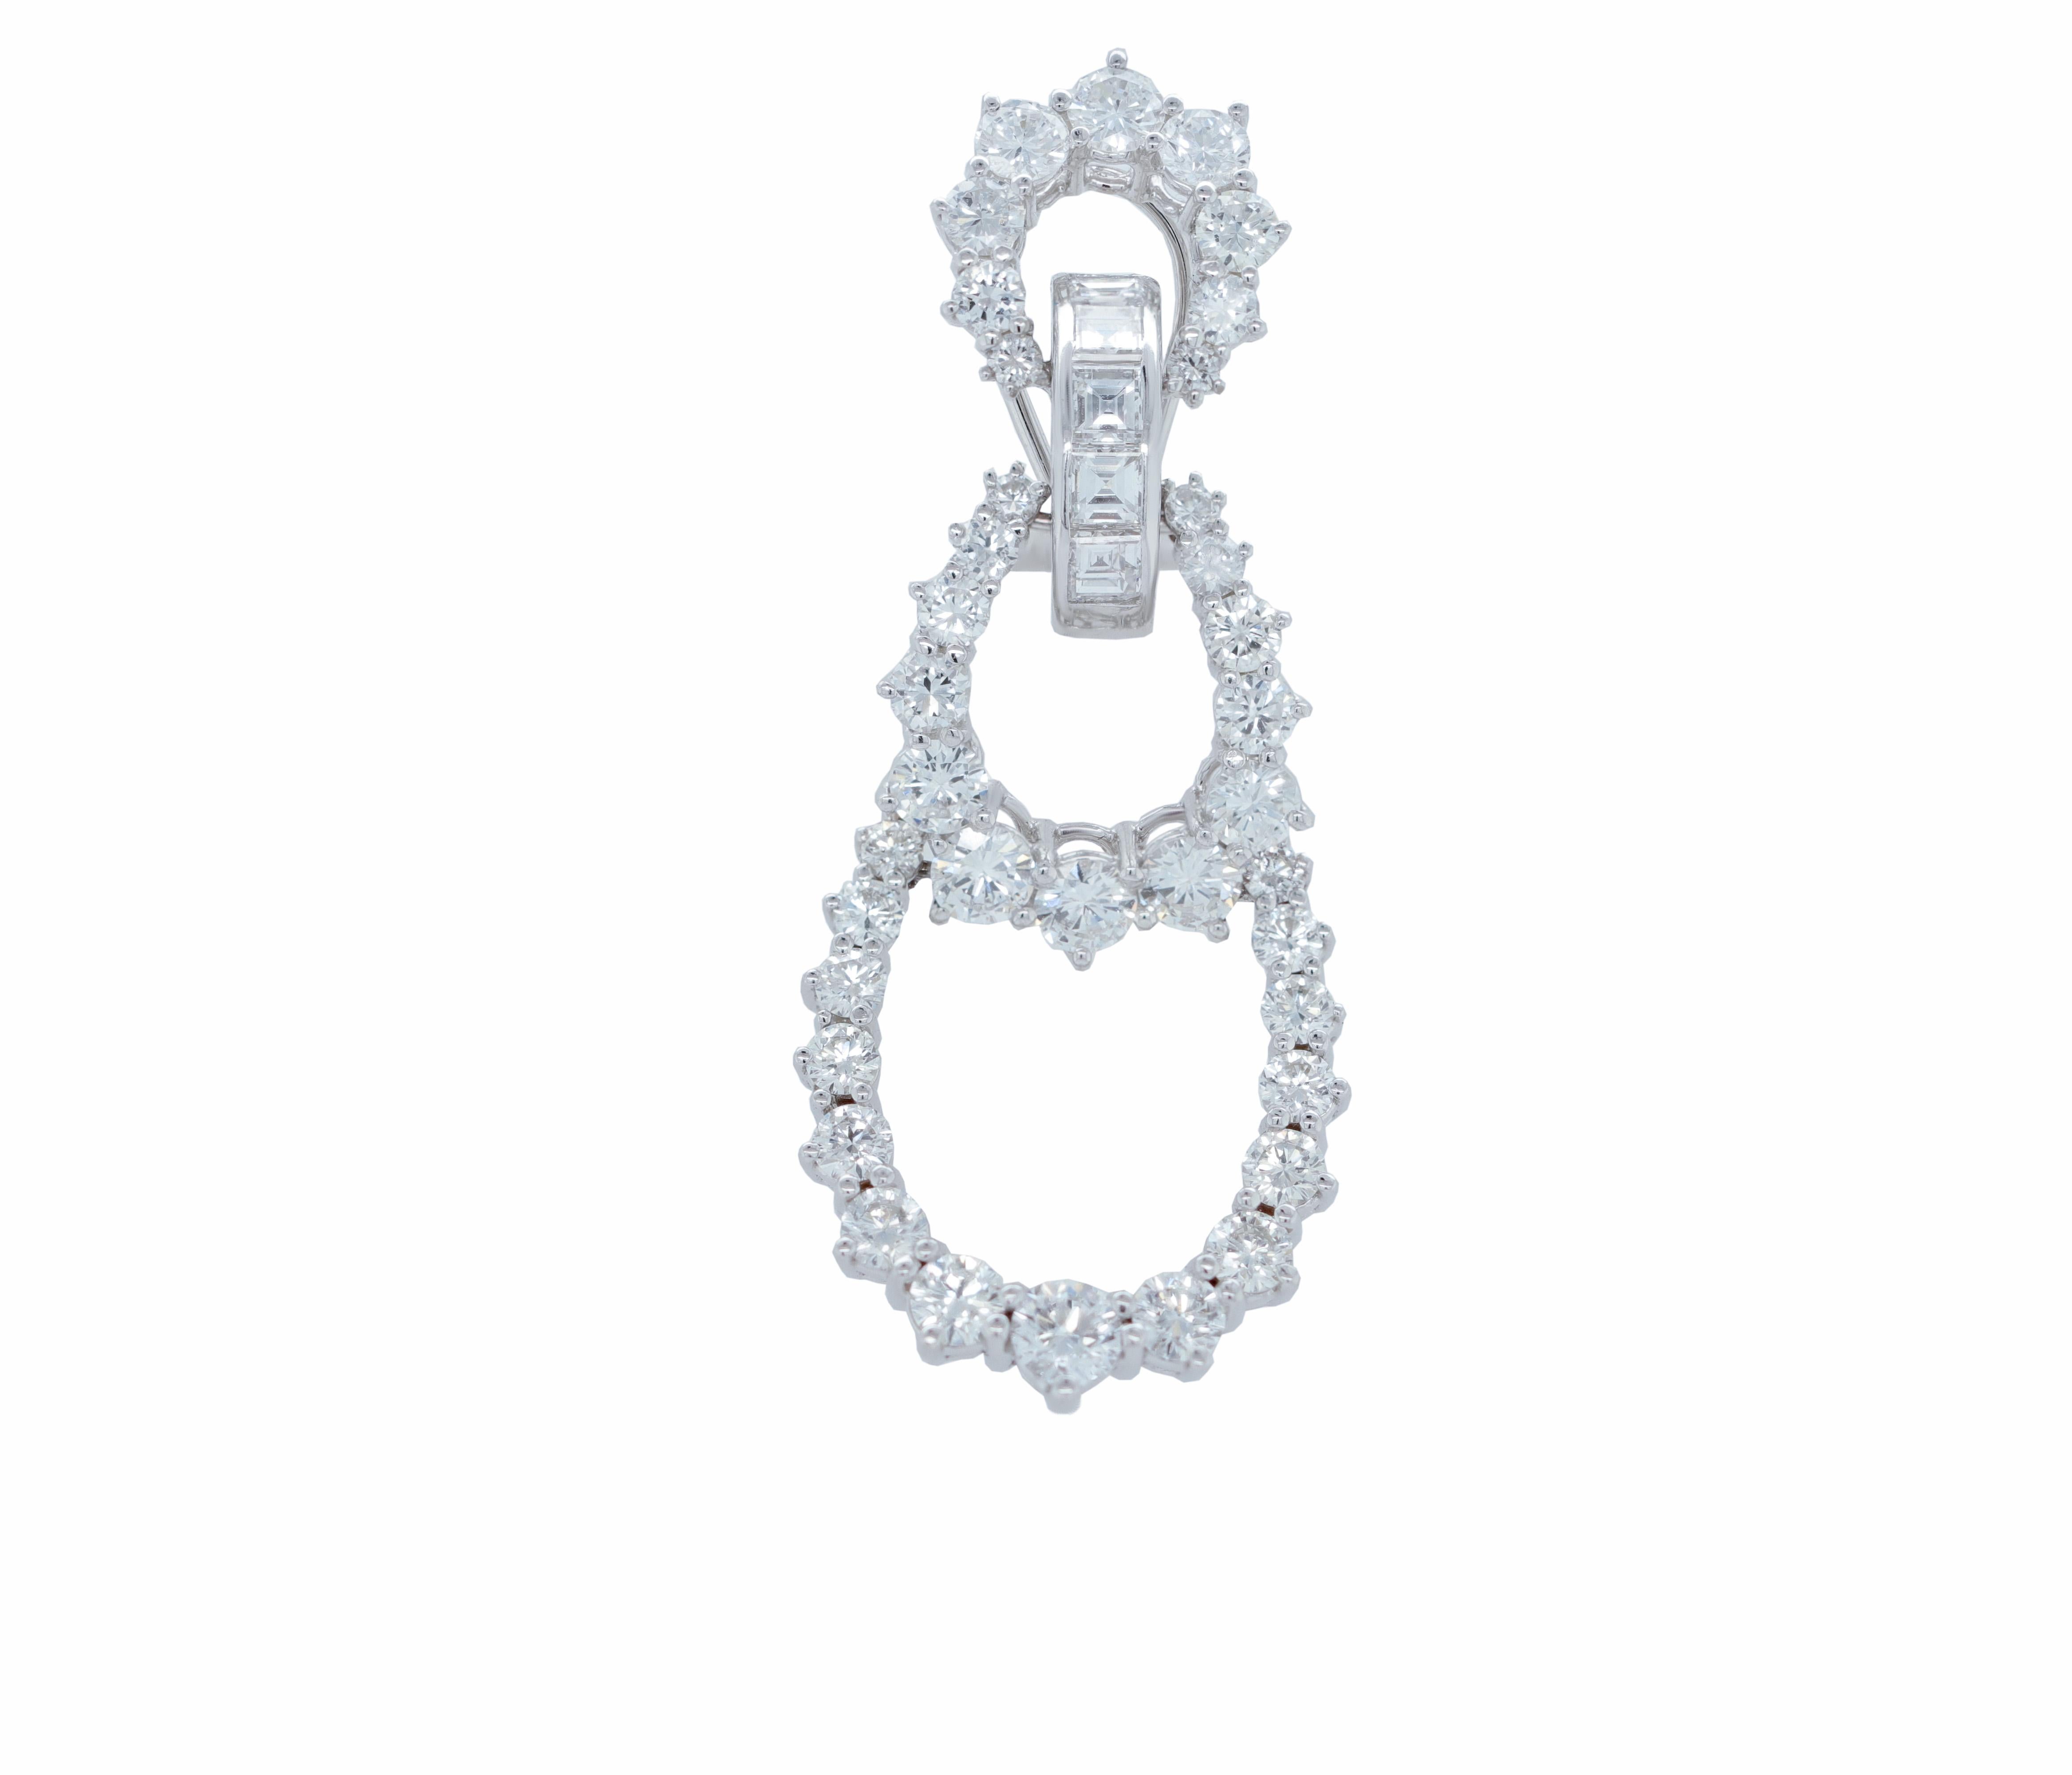 Diamond Chandelier Earrings in White Gold In New Condition For Sale In New York, NY